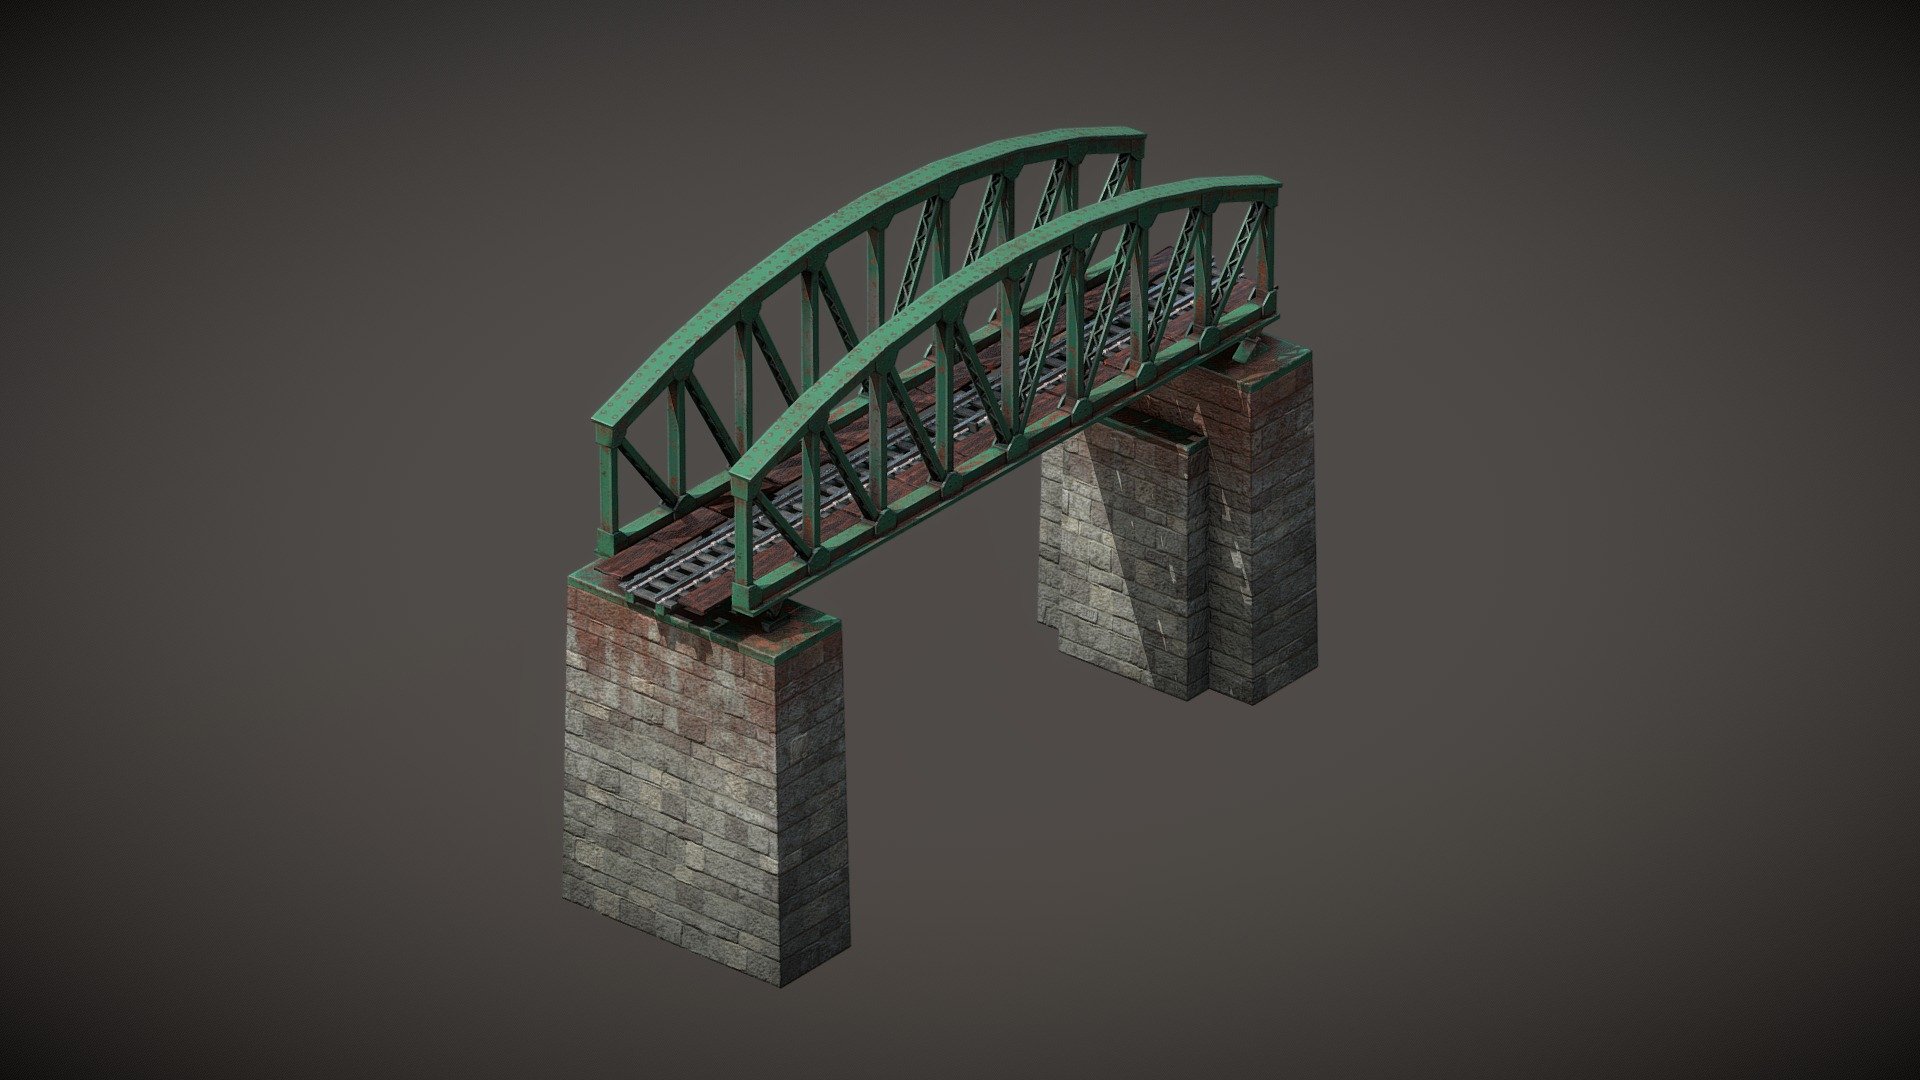 Railway bridge made from steel. Environment props are not included. 
Based on real-world references and tabletop models.
Railbrücke - Railway bridge - 3D model by Batonian 3d model